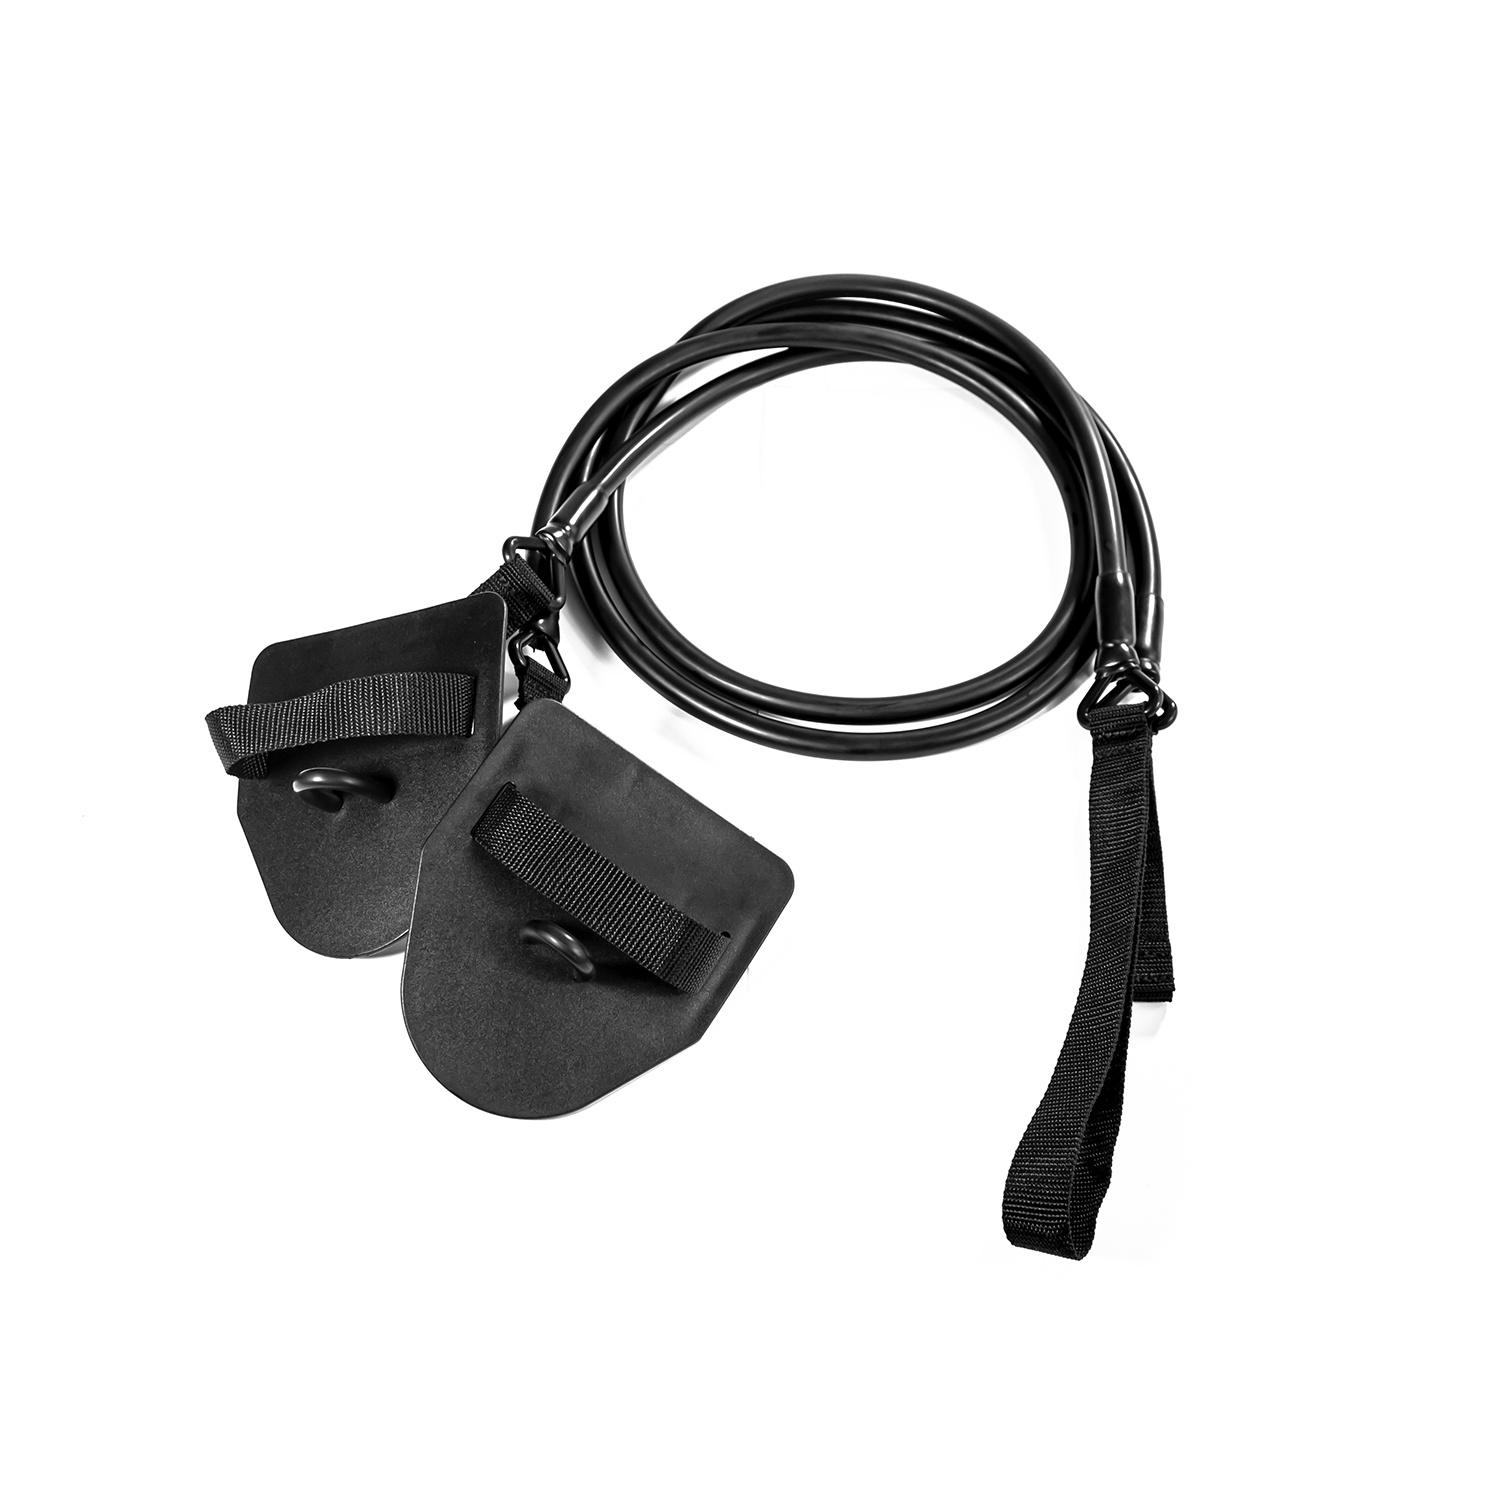 Wimming land arm training band with paddles AP-117